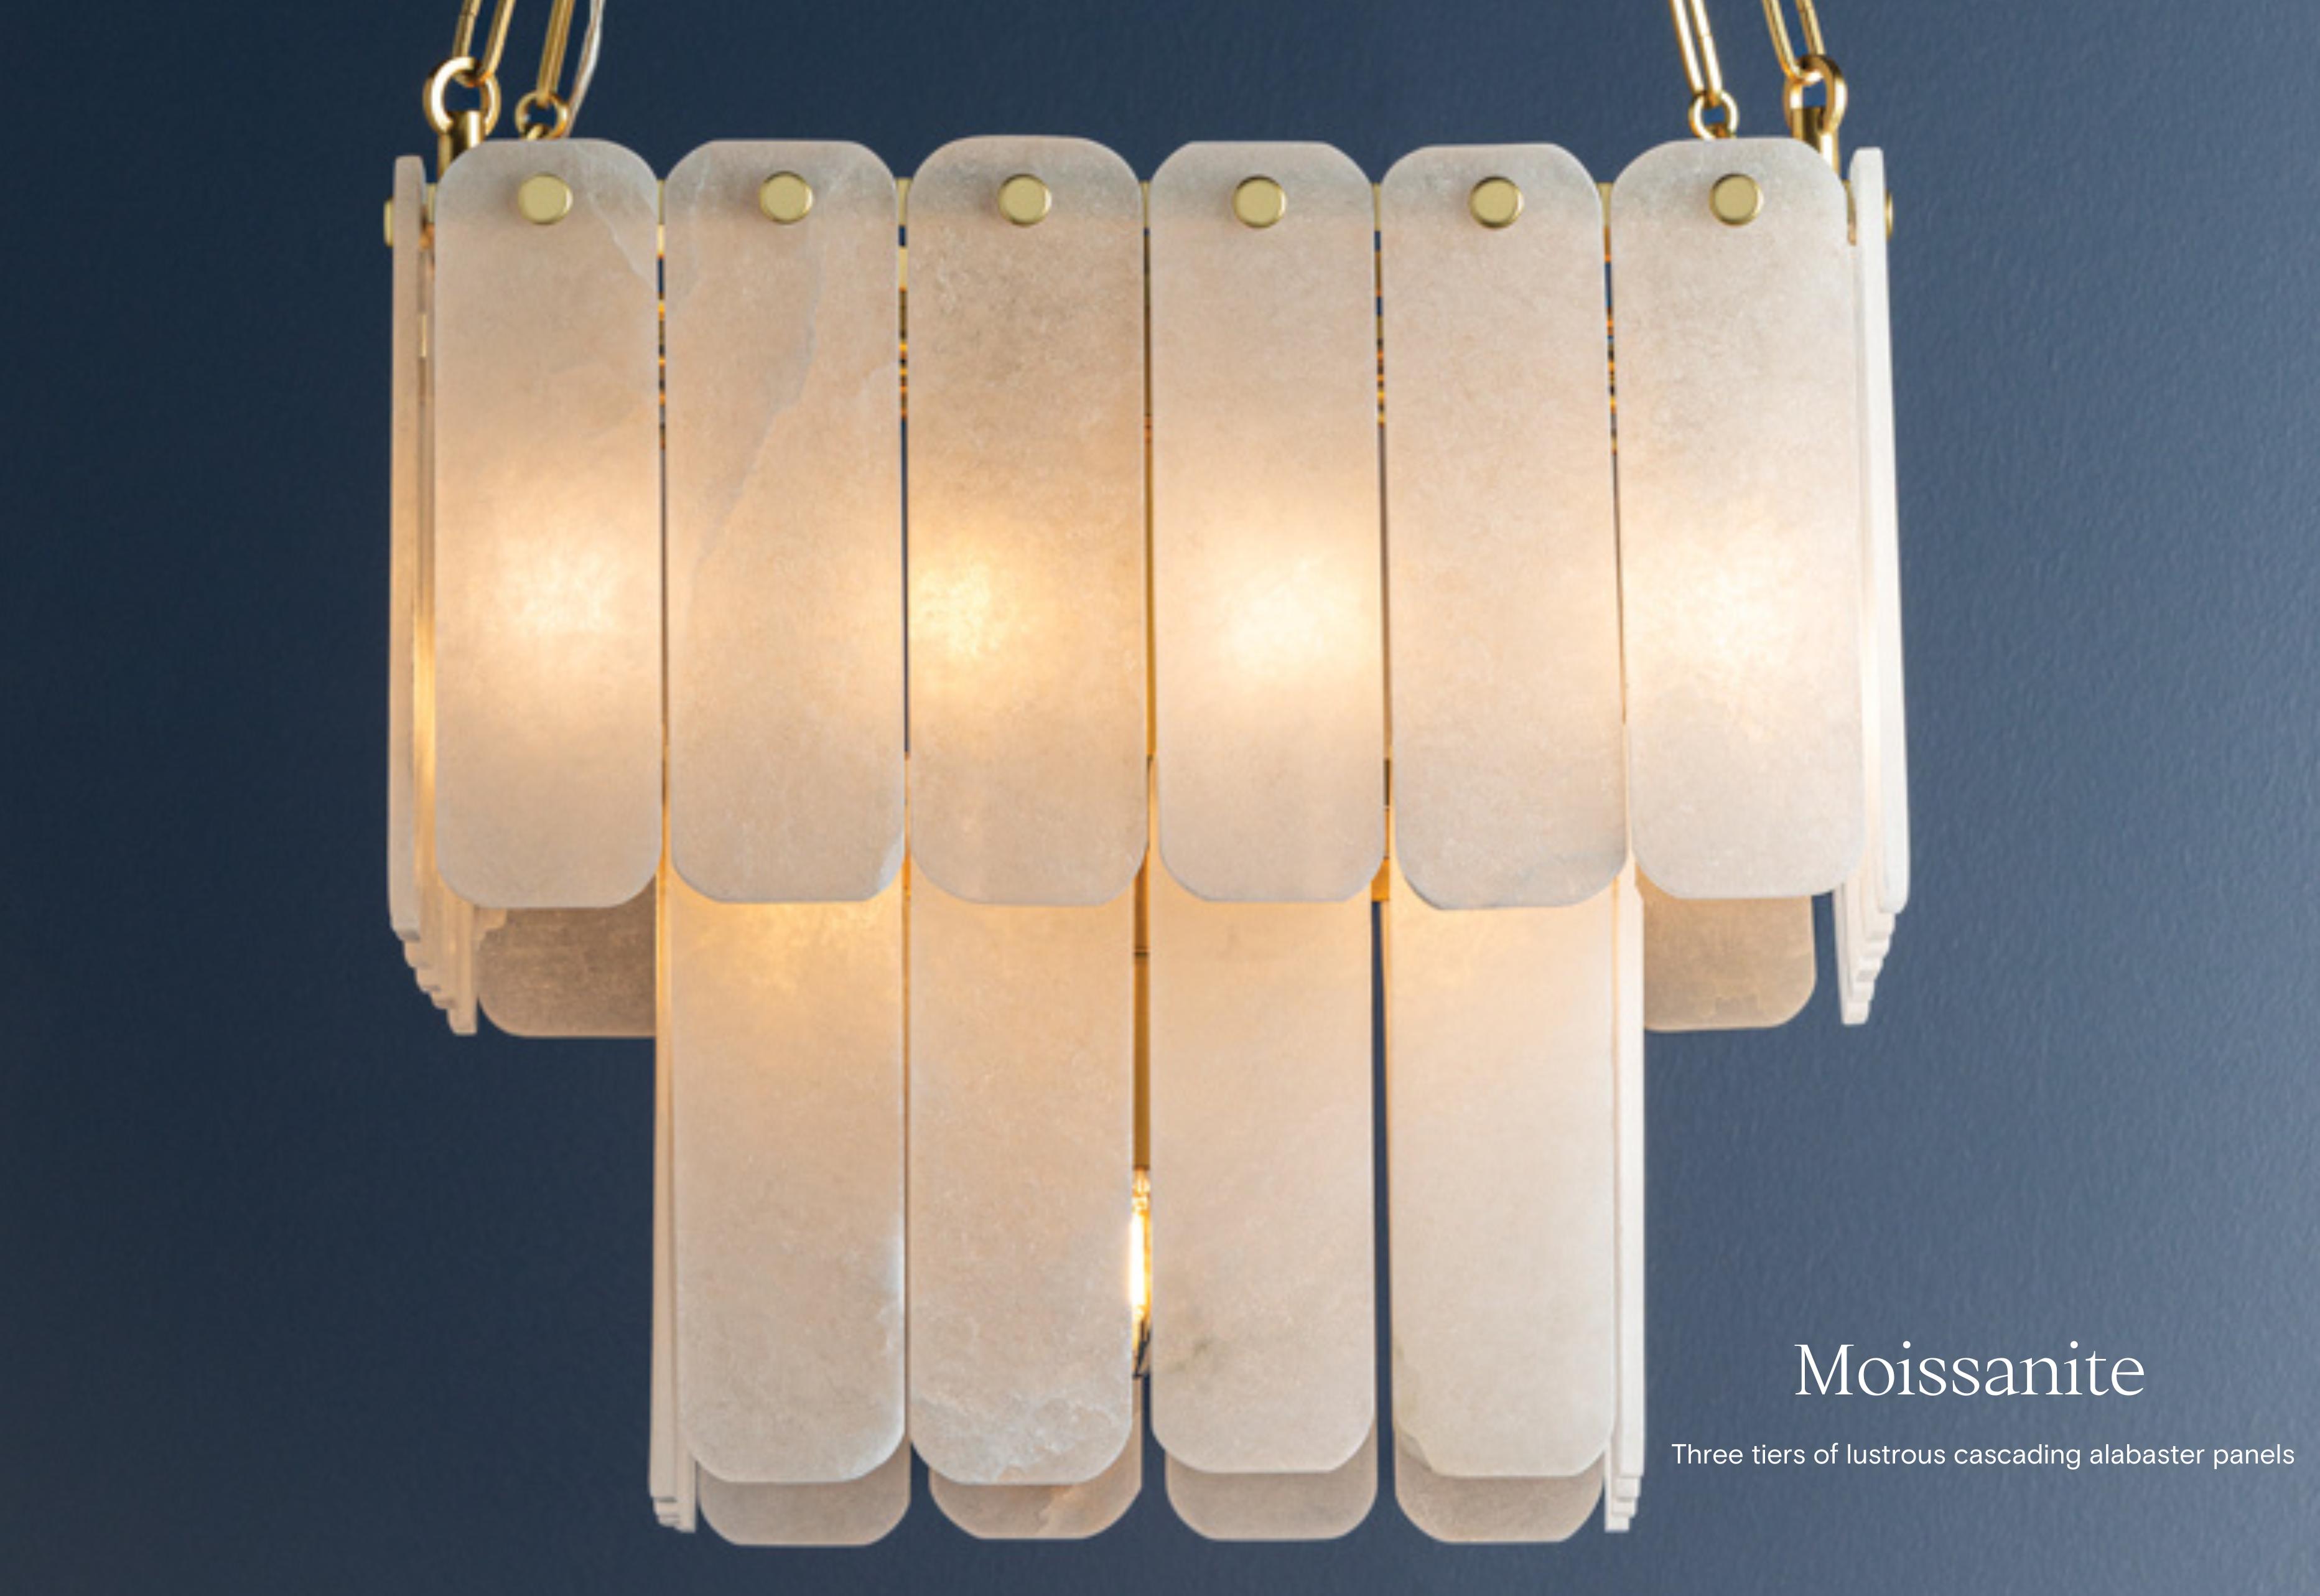 The Moissanite chandelier by Hudson Valley Lighting with tiers of lustrous cascading alabaster panels